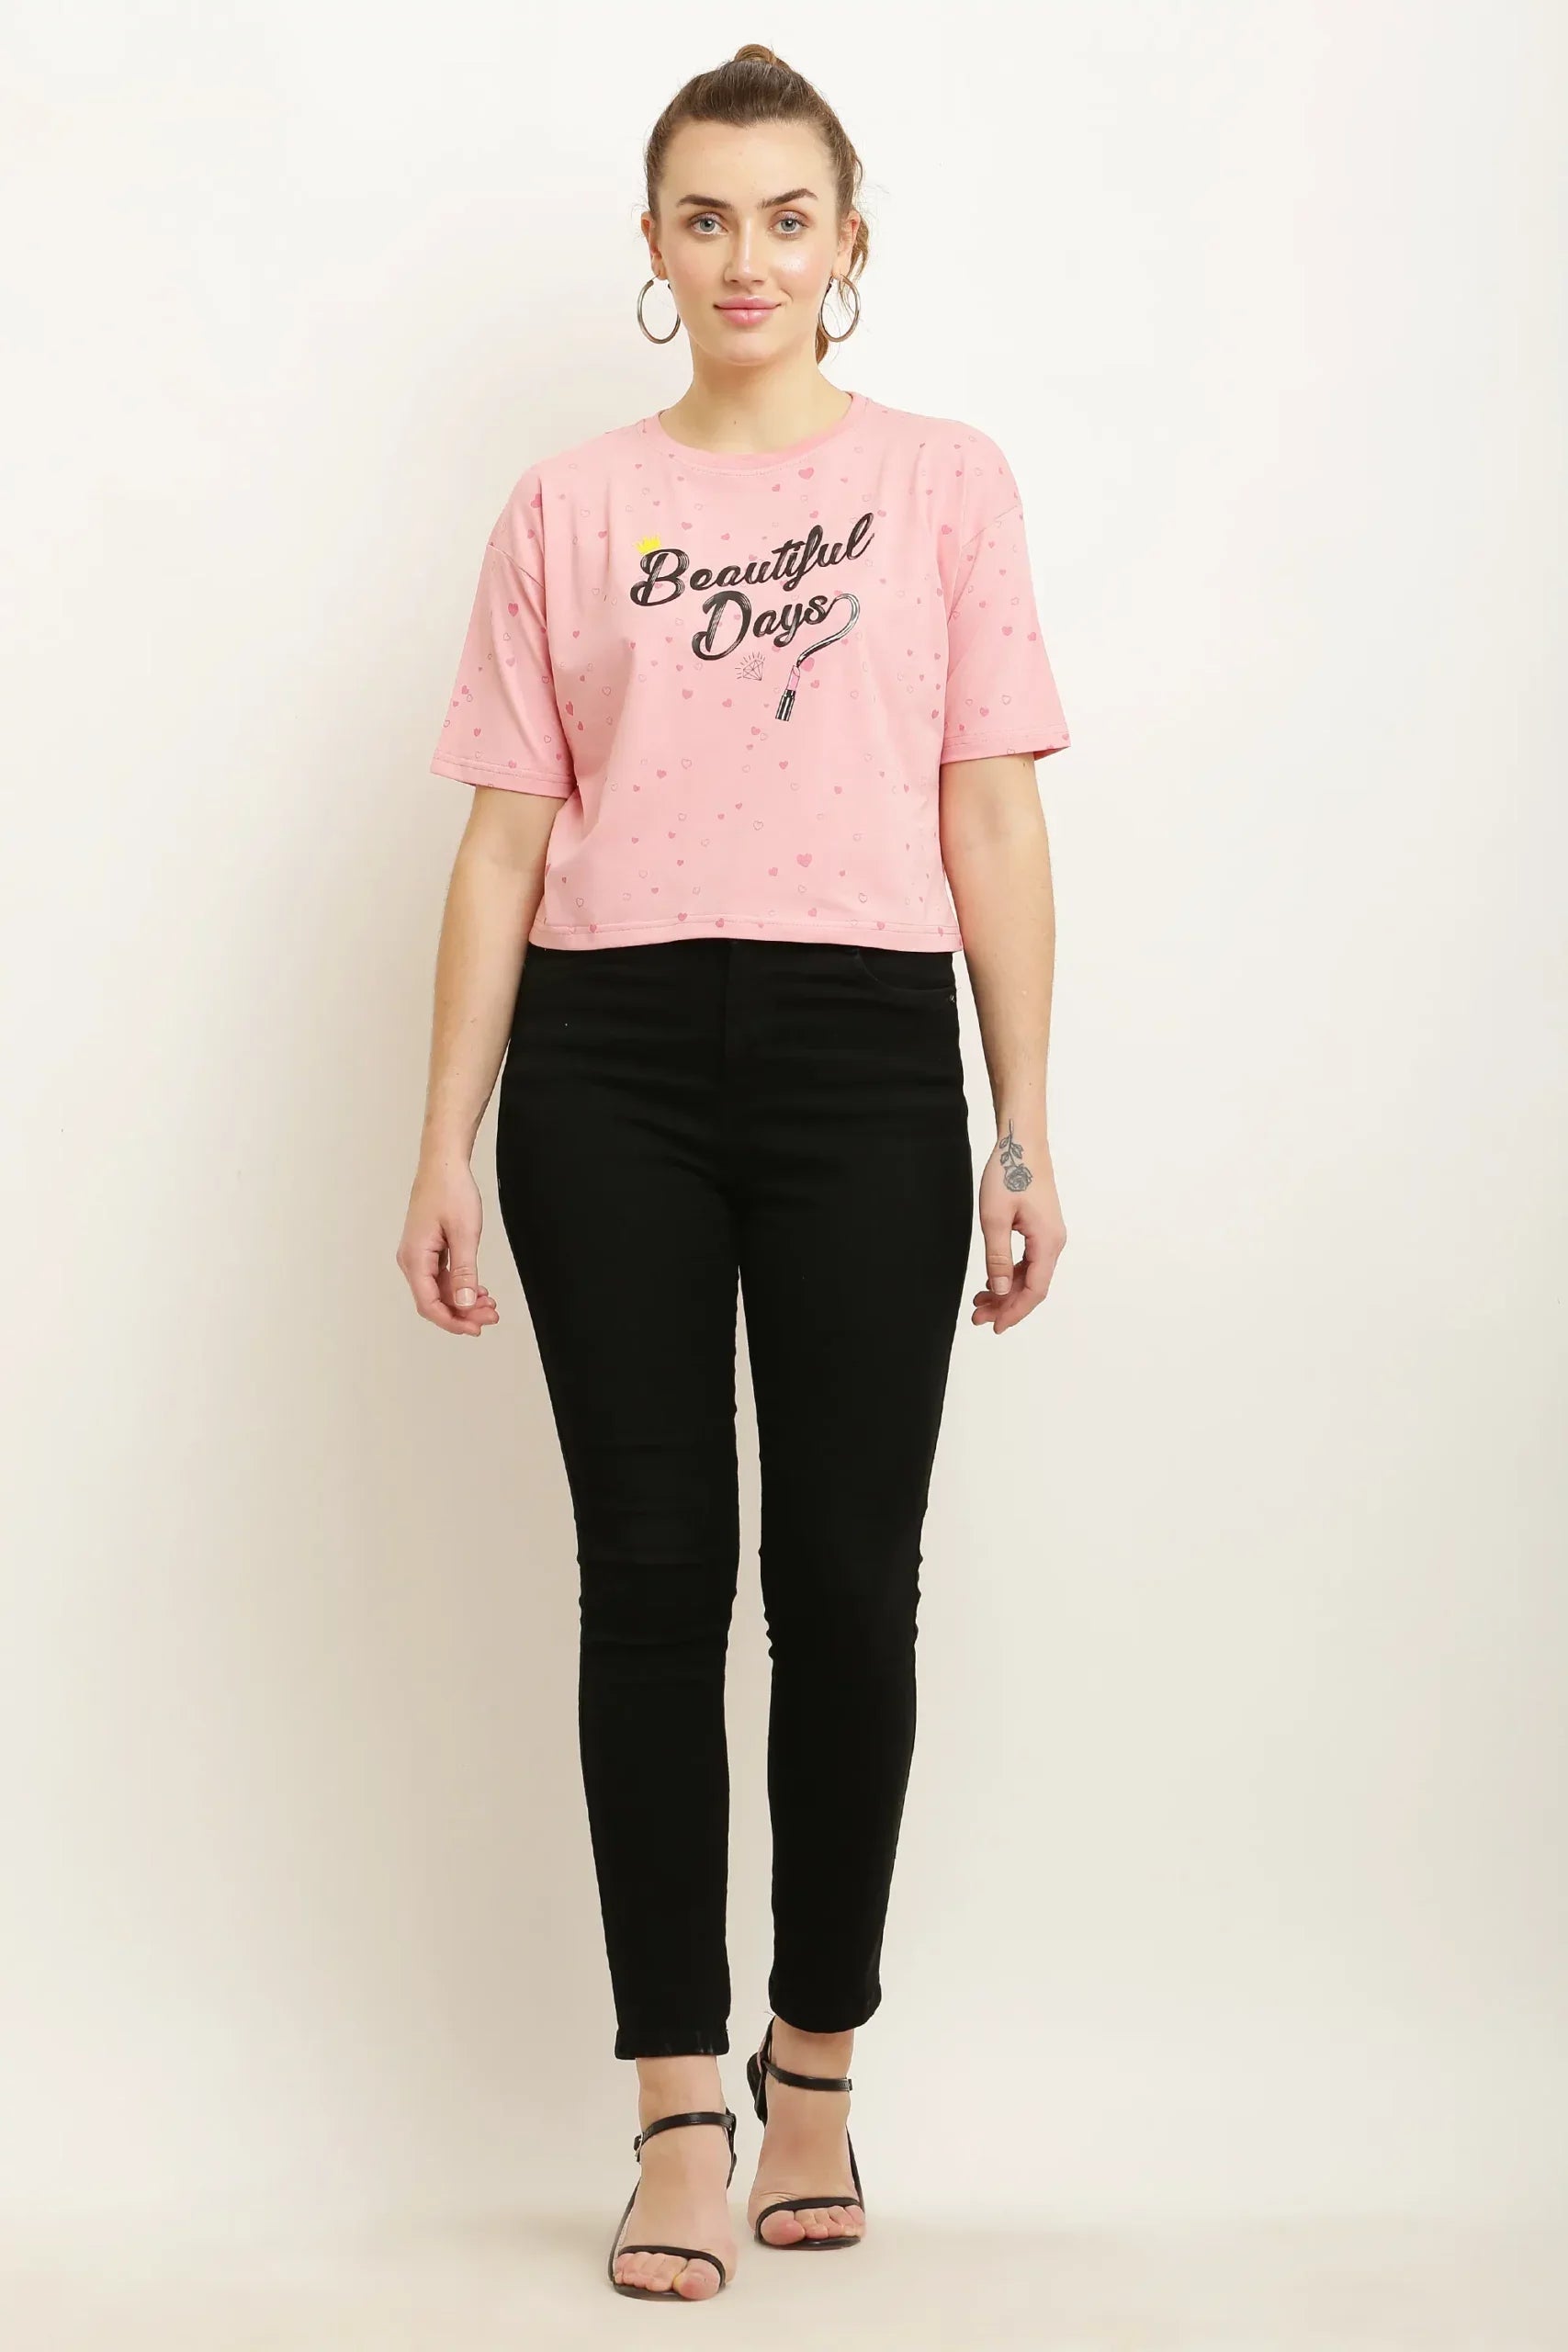 Beautiful Days (Rose Gold) Crop Tshirt - Embrace Everyday Beauty